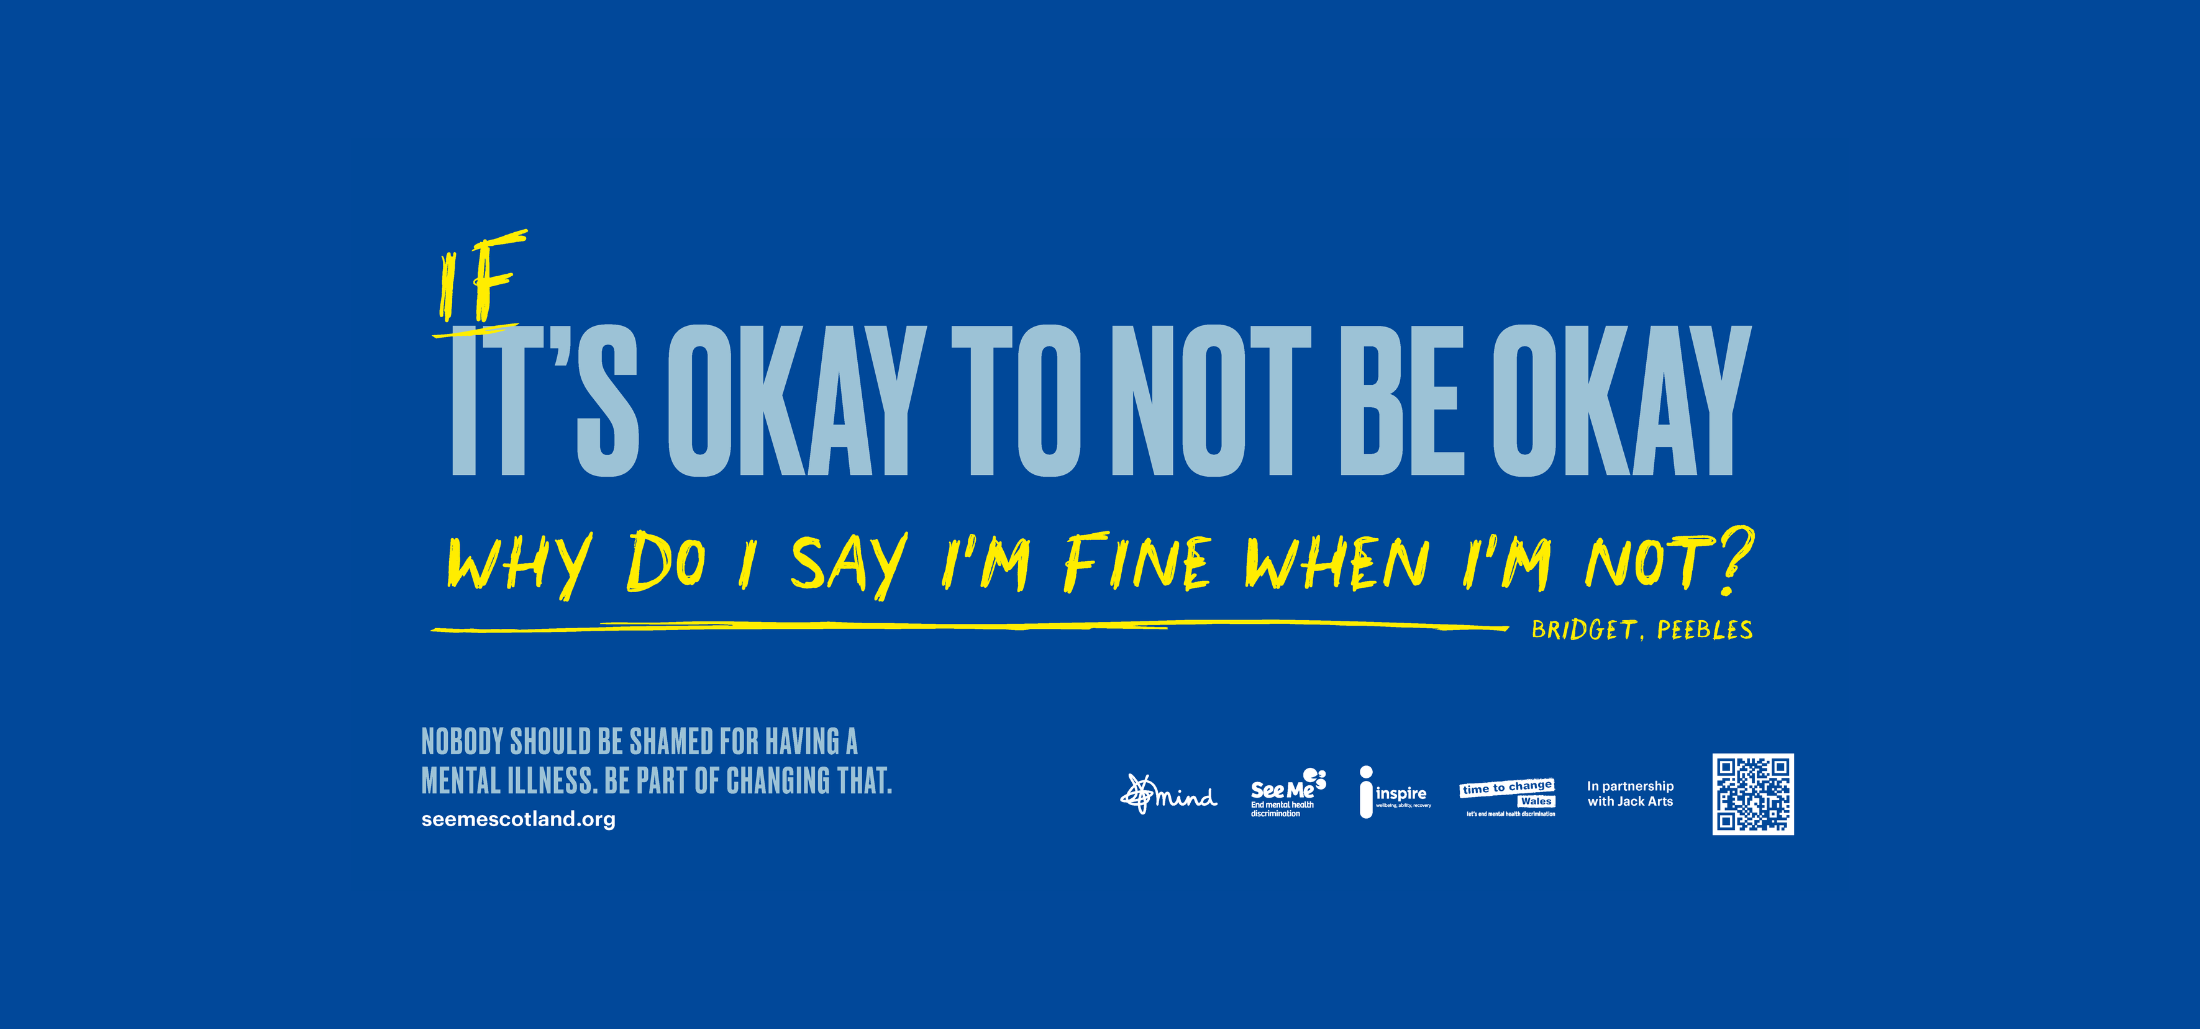 if it's oaky to not be okay image on blue